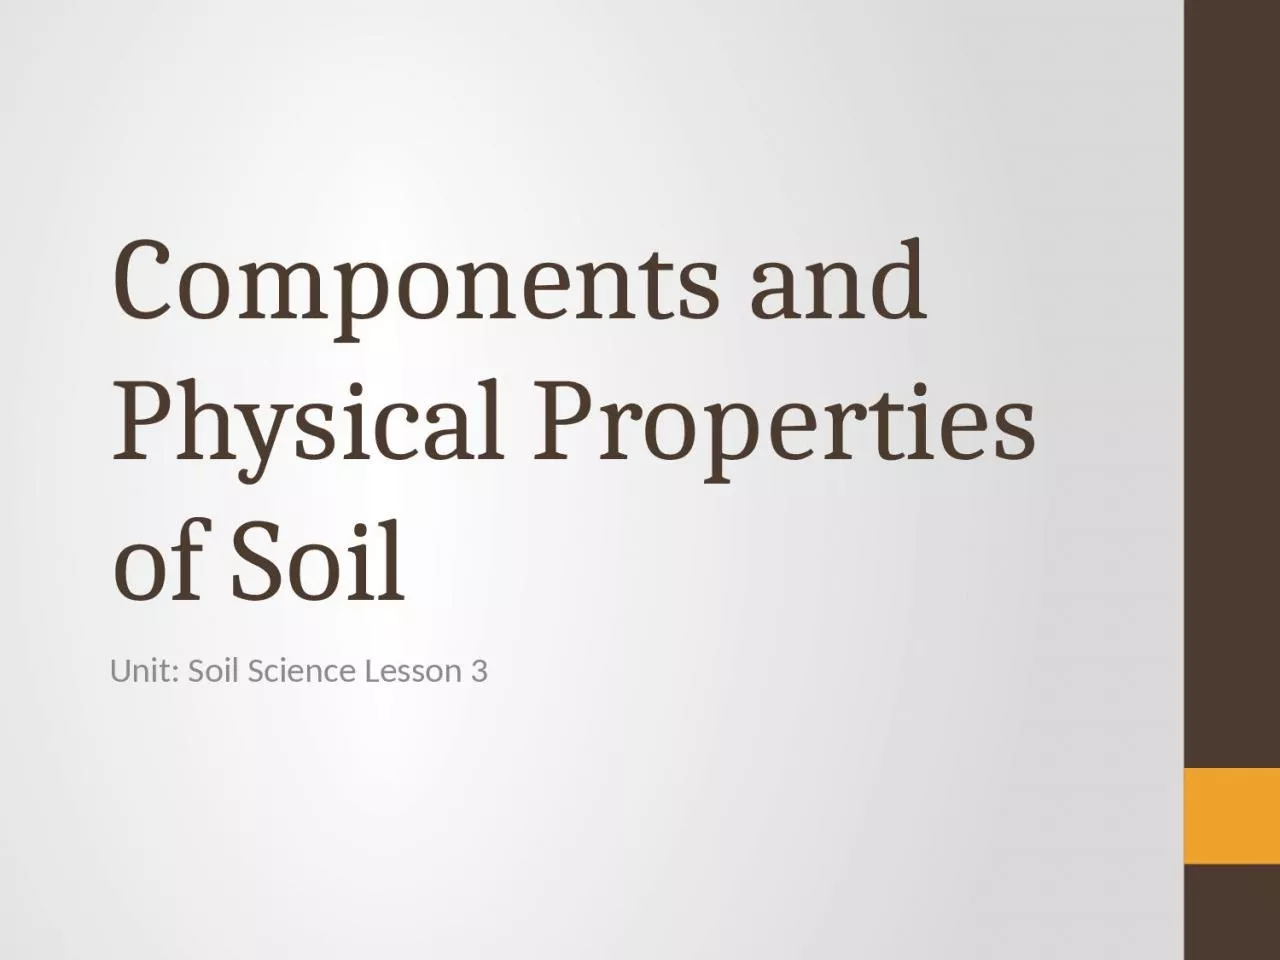 Components and Physical Properties of Soil